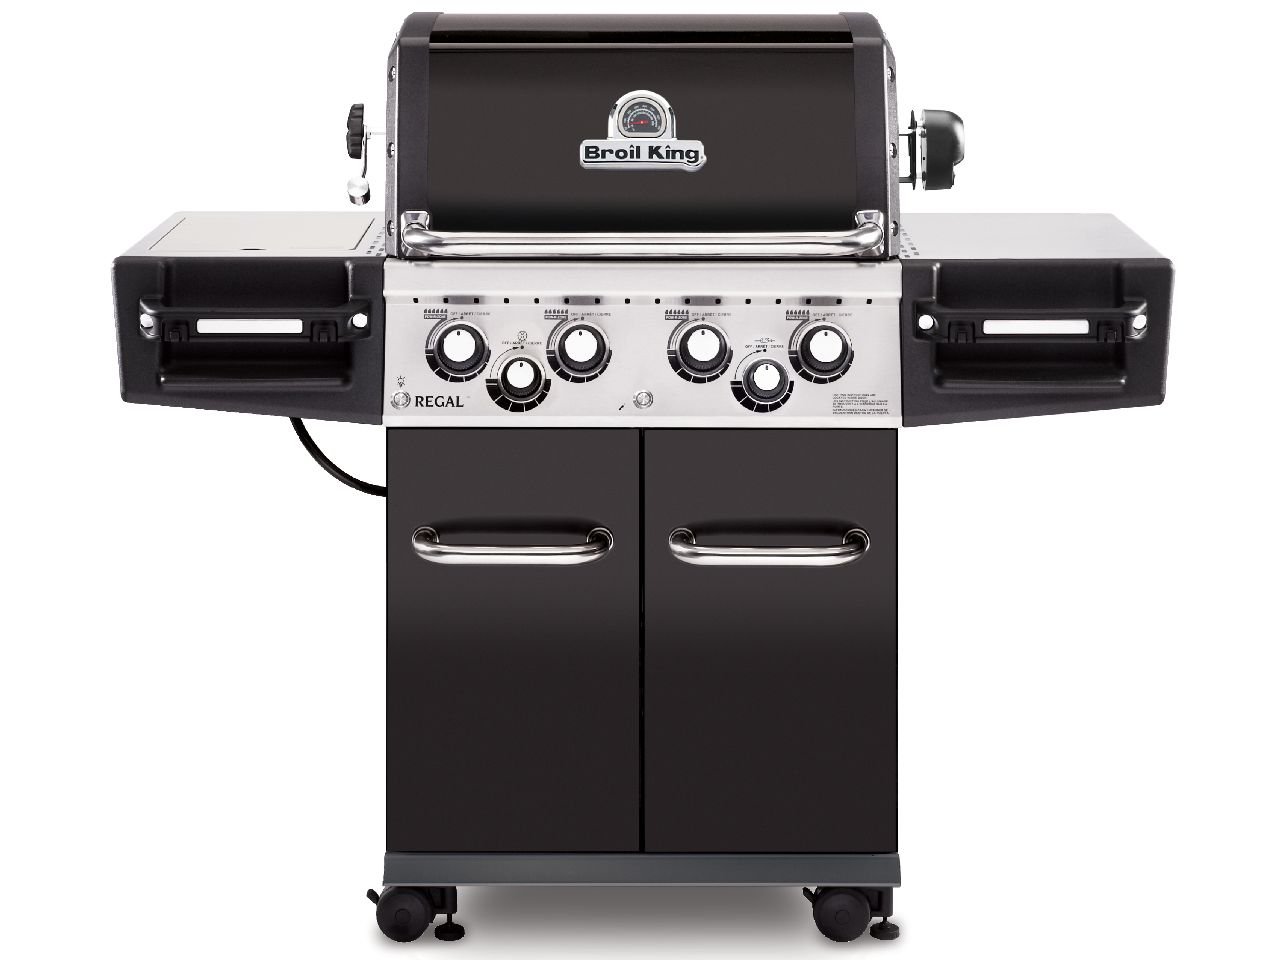 Barbecue Broil King mod. Regal - 1